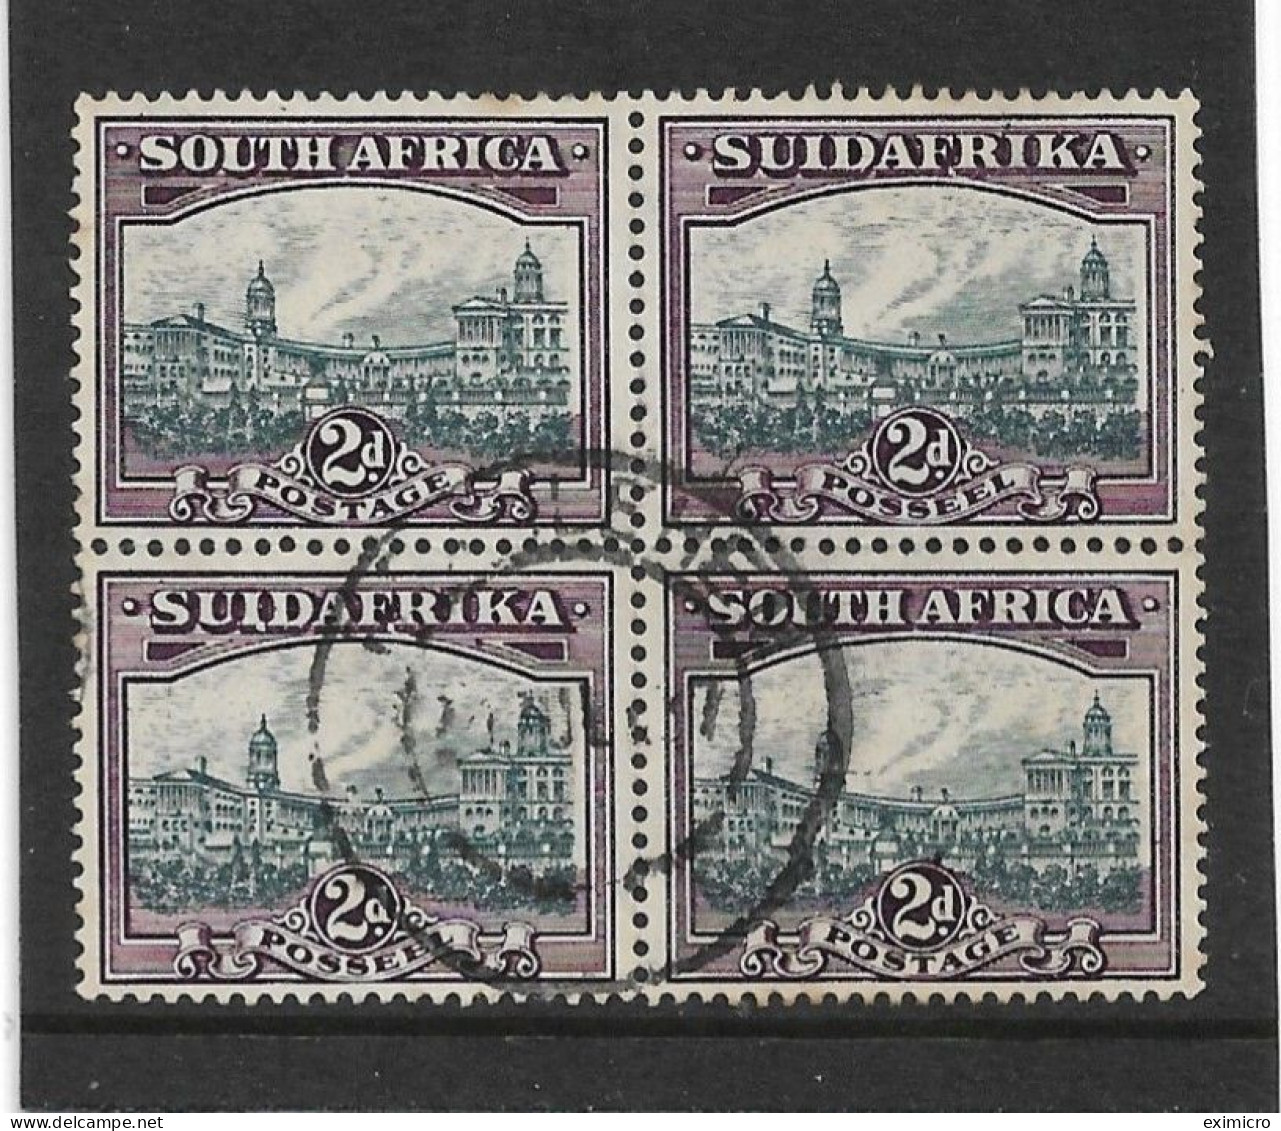 SOUTH AFRICA 1927 - 1930 2d IN BLOCK OF FOUR SG 34 PERF 14 FINE USED Cat £76 - Used Stamps